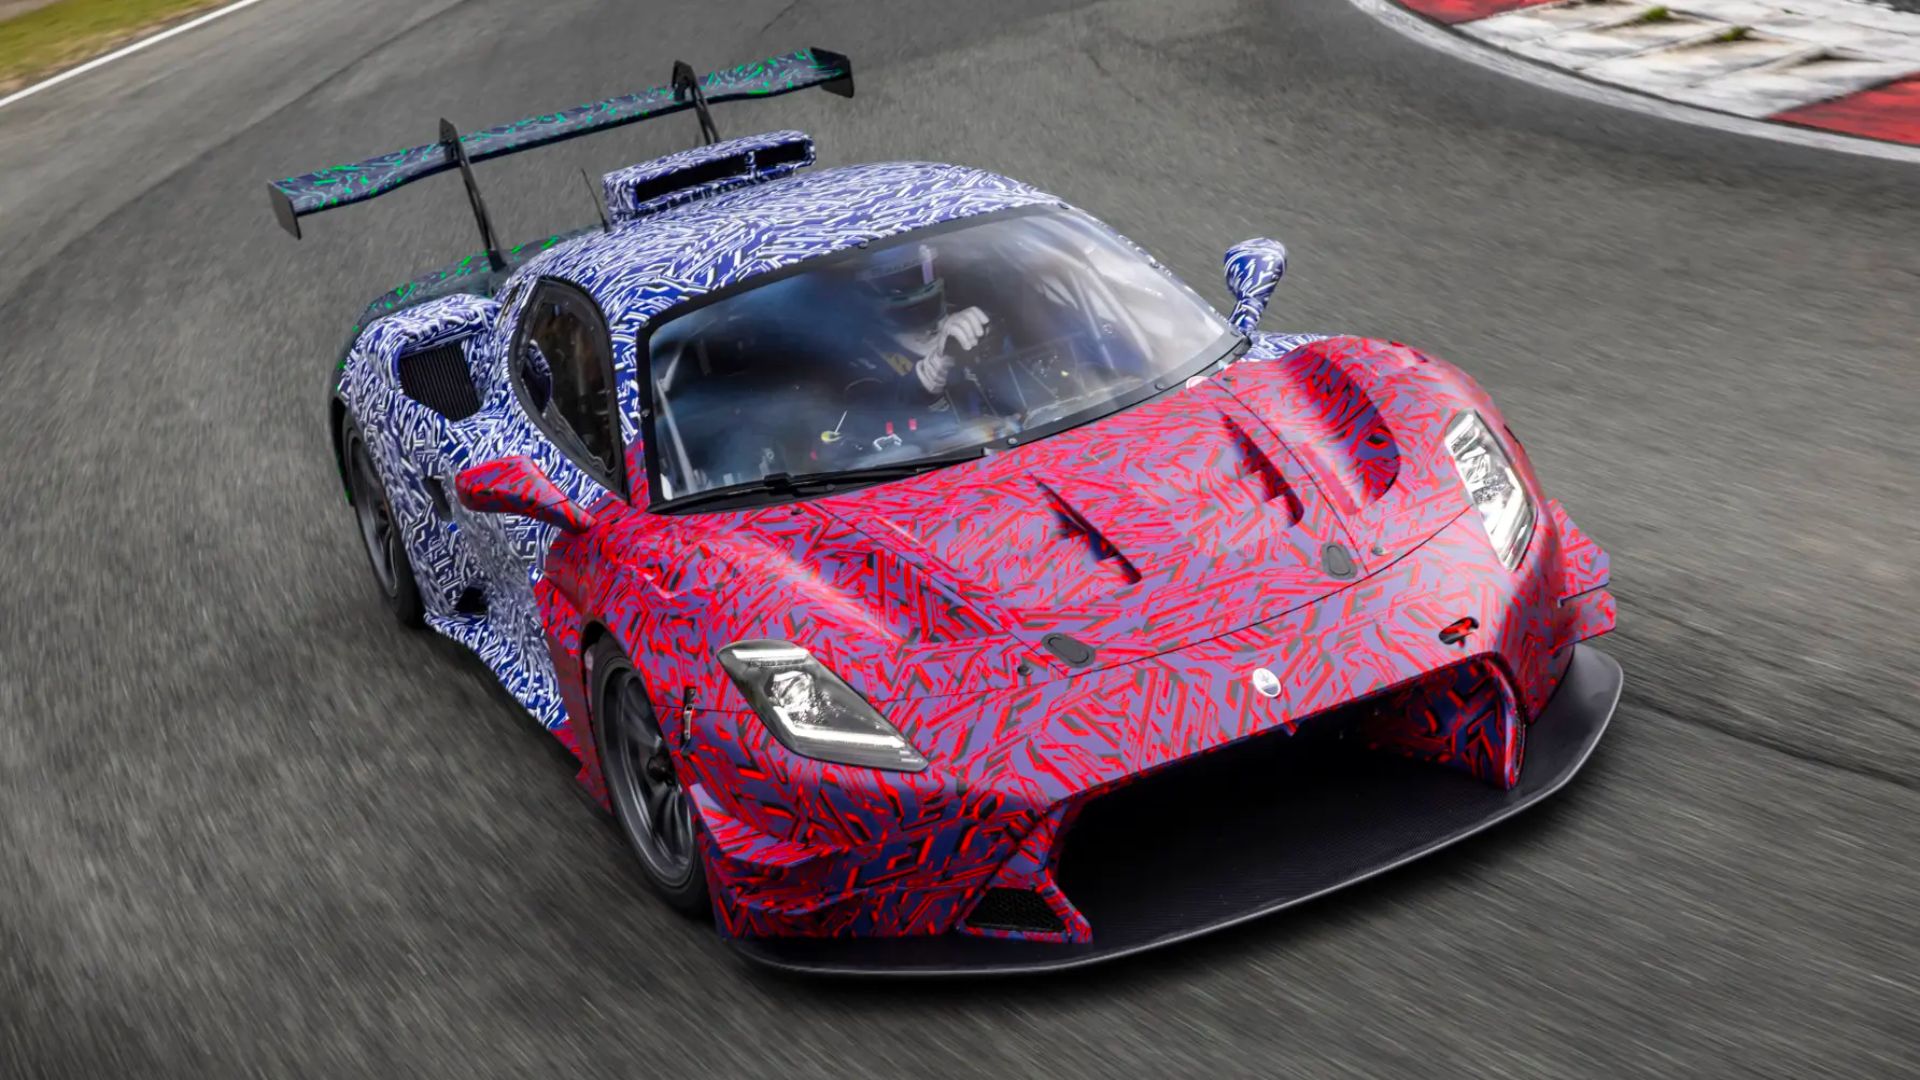 Maserati MC20 is transformed into the GT2 race car